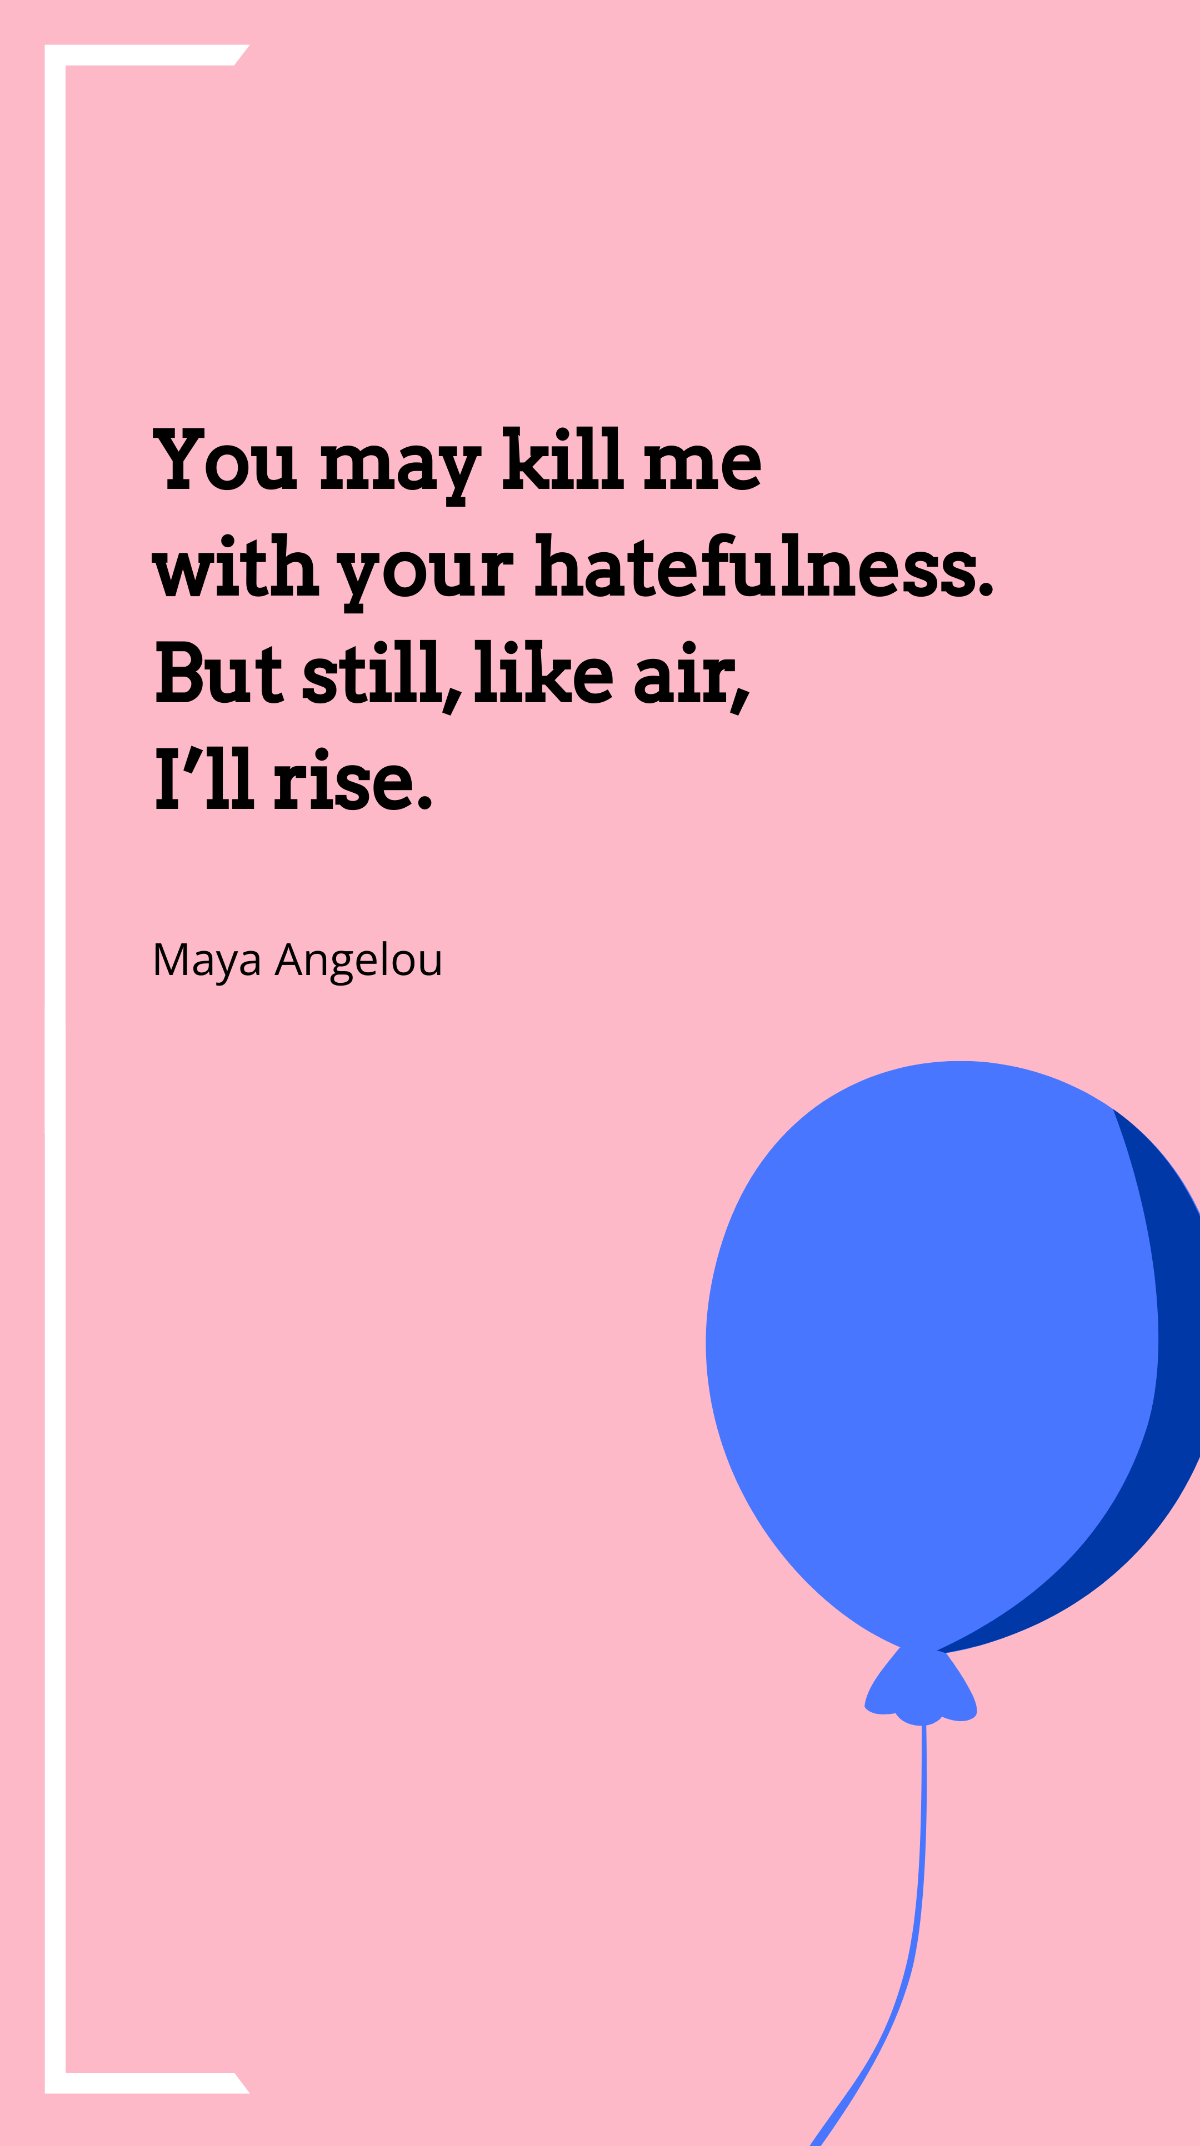 Maya Angelou - You may kill me with your hatefulness. But still, like air, I’ll rise. Template